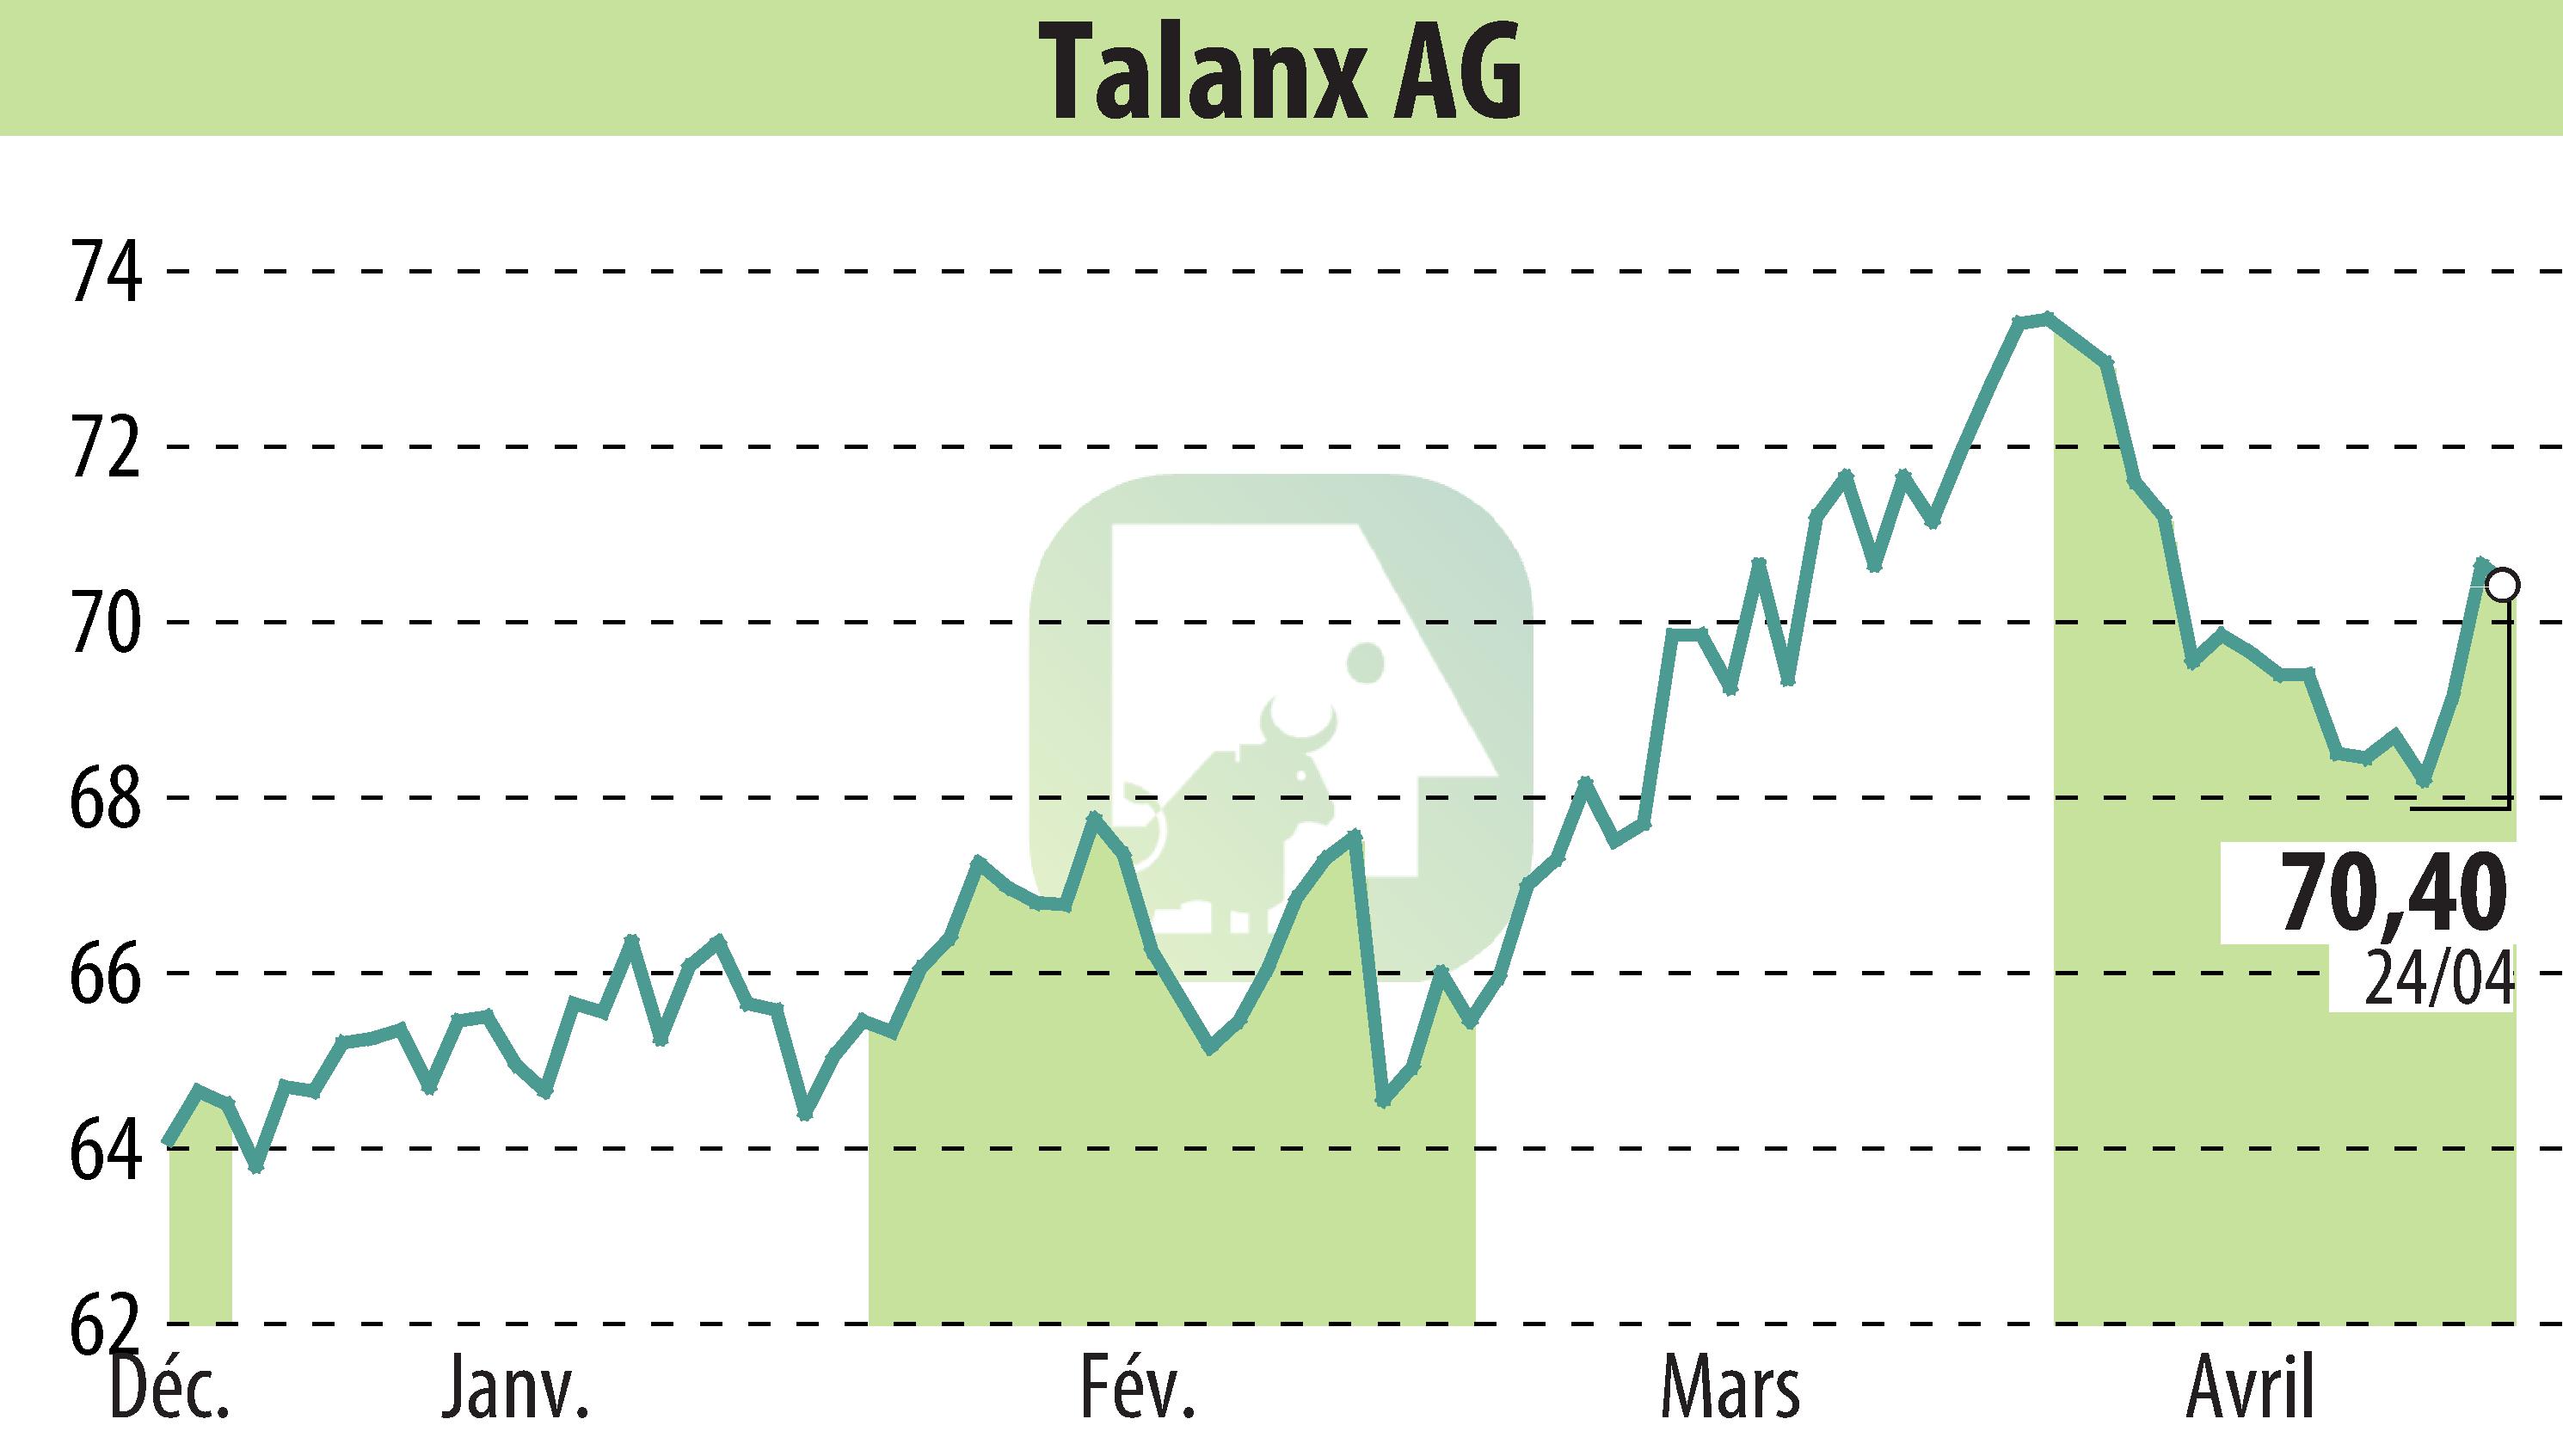 Stock price chart of Talanx Aktiengesellschaft (EBR:TLX) showing fluctuations.